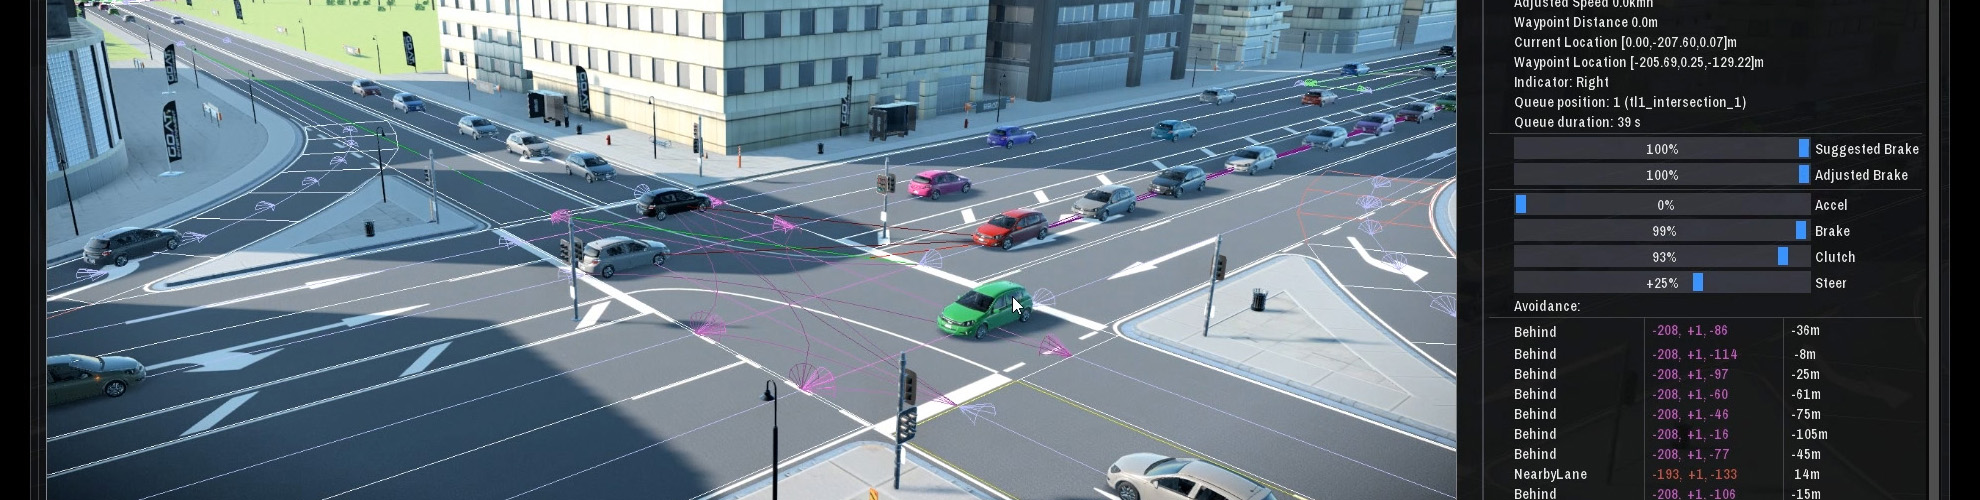 Real-Time Traffic Simulation Technology